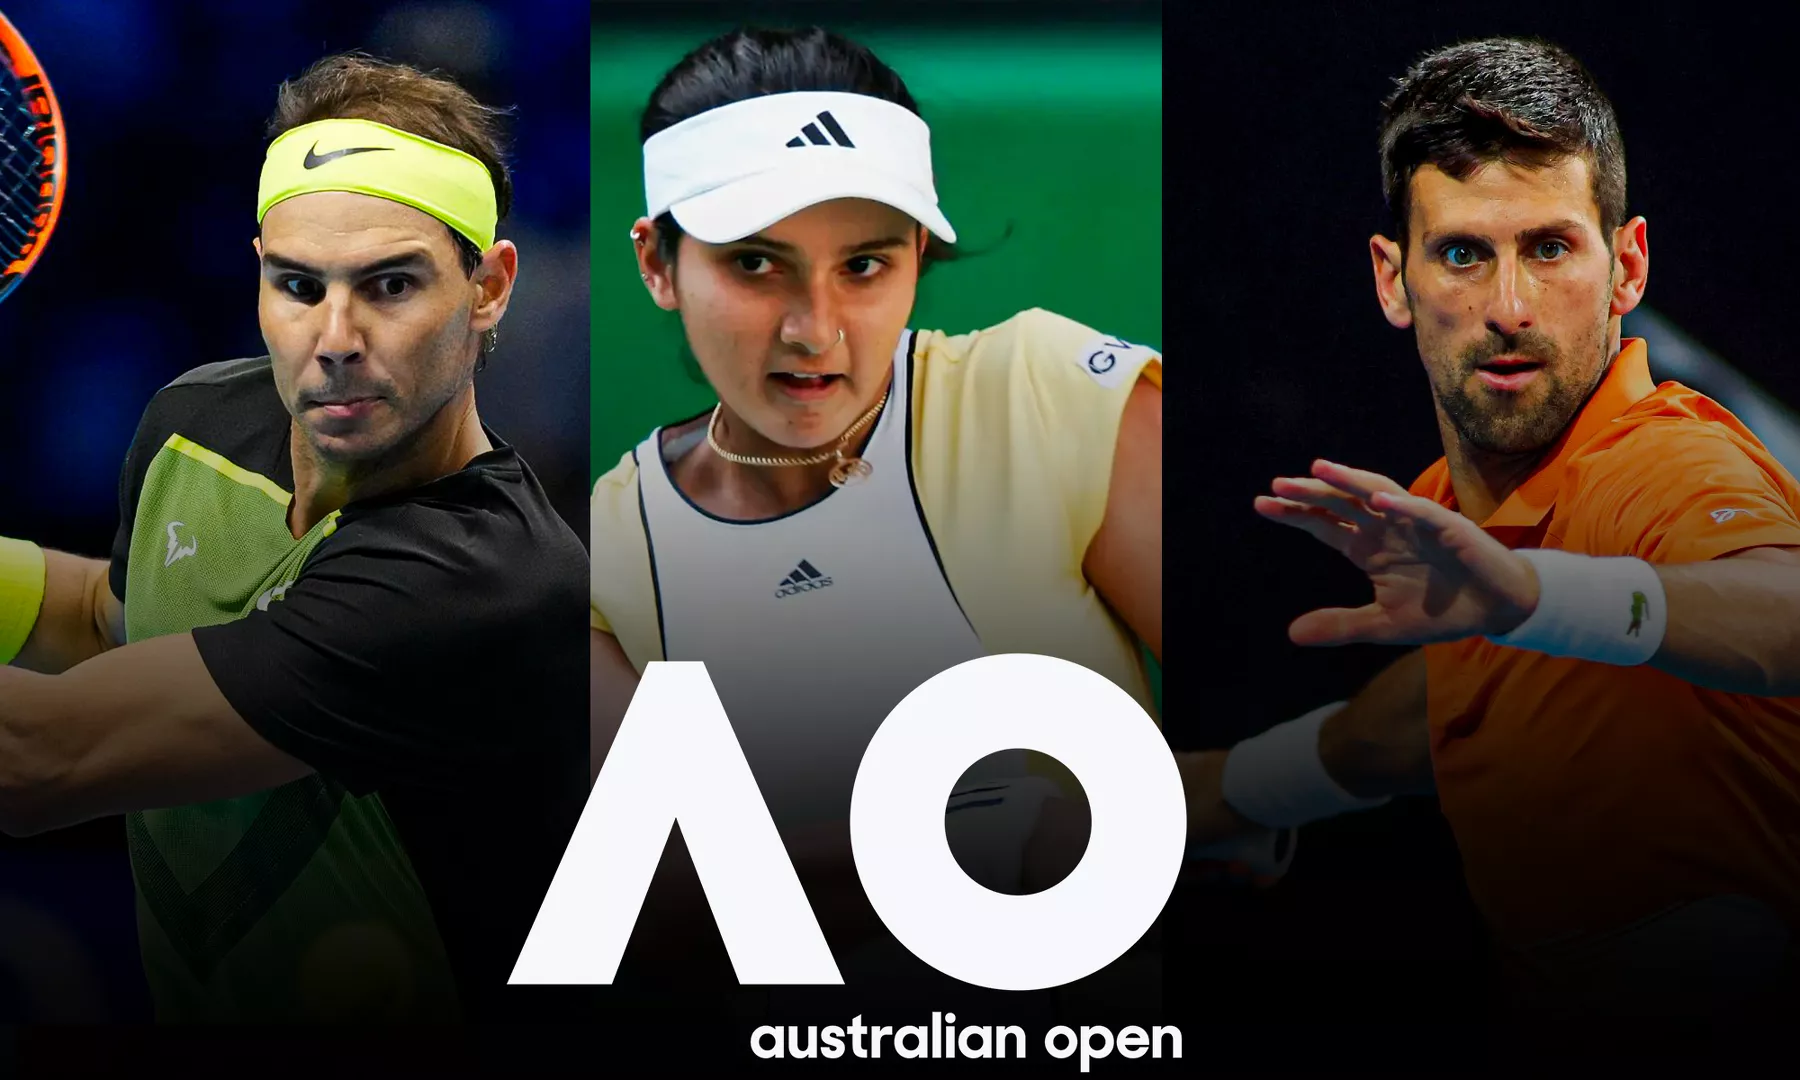 Australian Open 2023 full fixtures, schedule, timings, results and telecast details